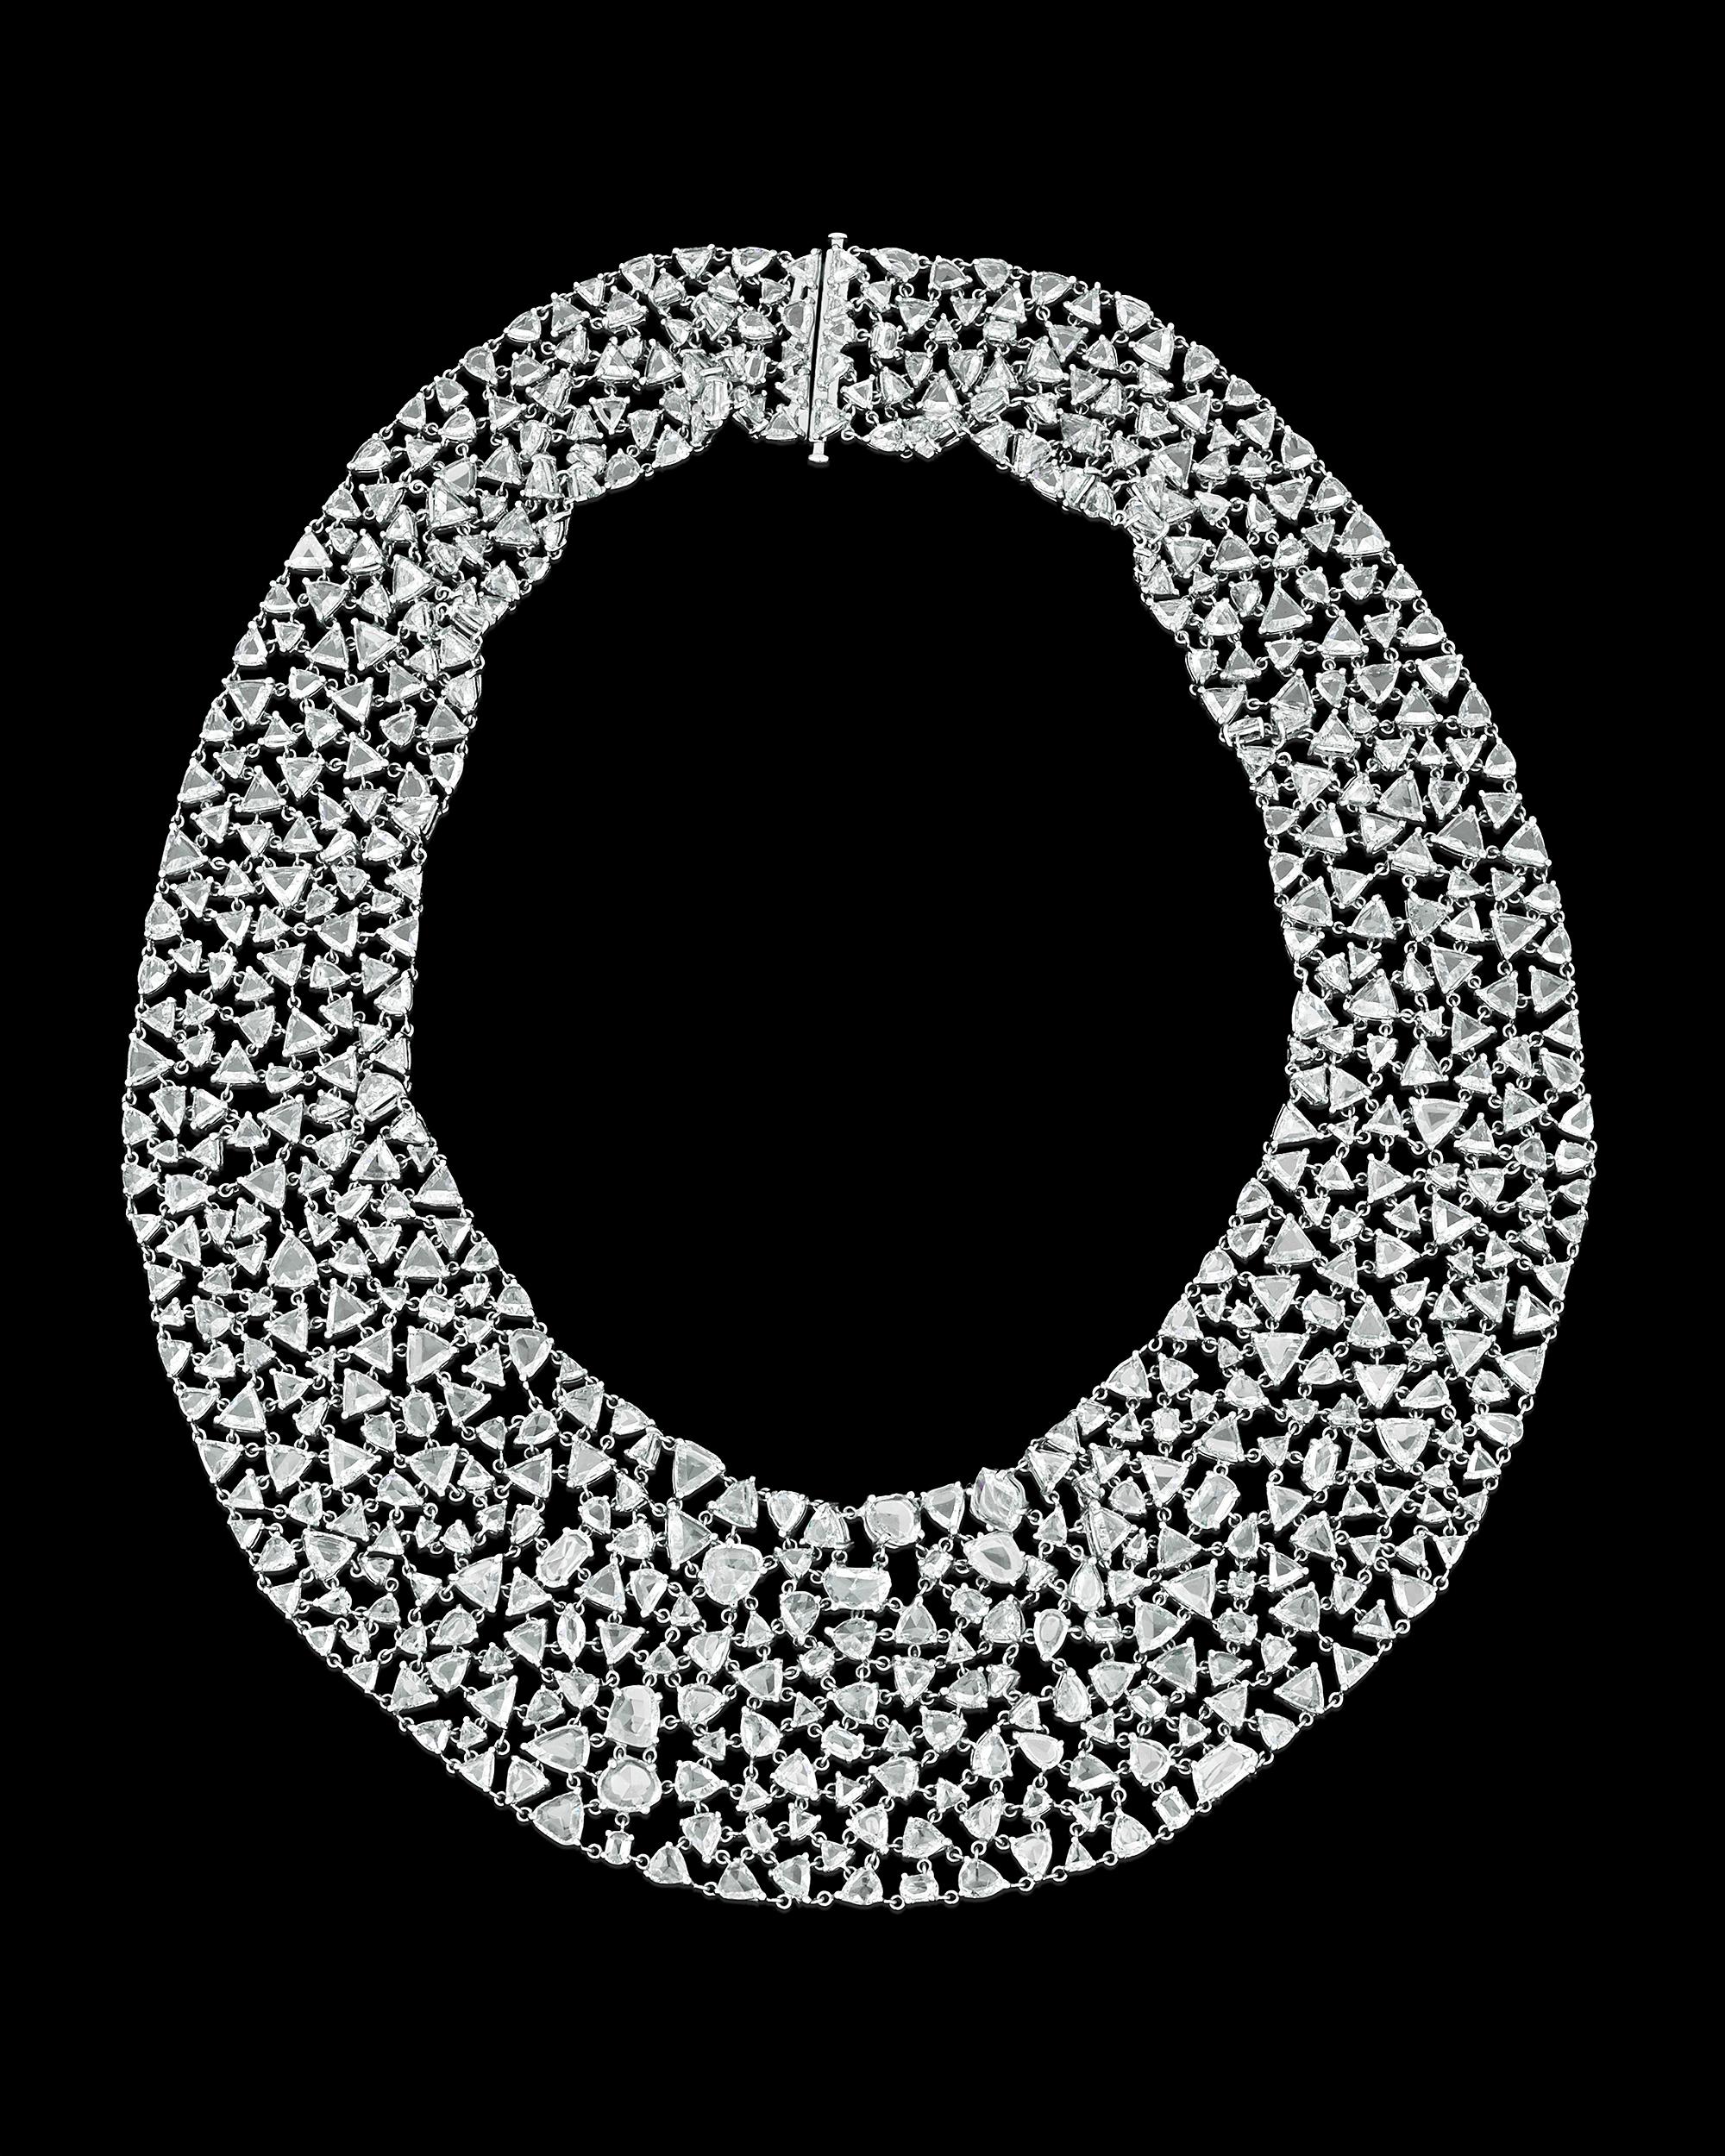 A marvelous array of rose-cut diamonds cover this spectacular 18K white gold necklace. The jewels weigh approximately 110.00 combined carats and are cut in oval, pear, round, trilliant and other dazzling shapes that are meticulously linked together